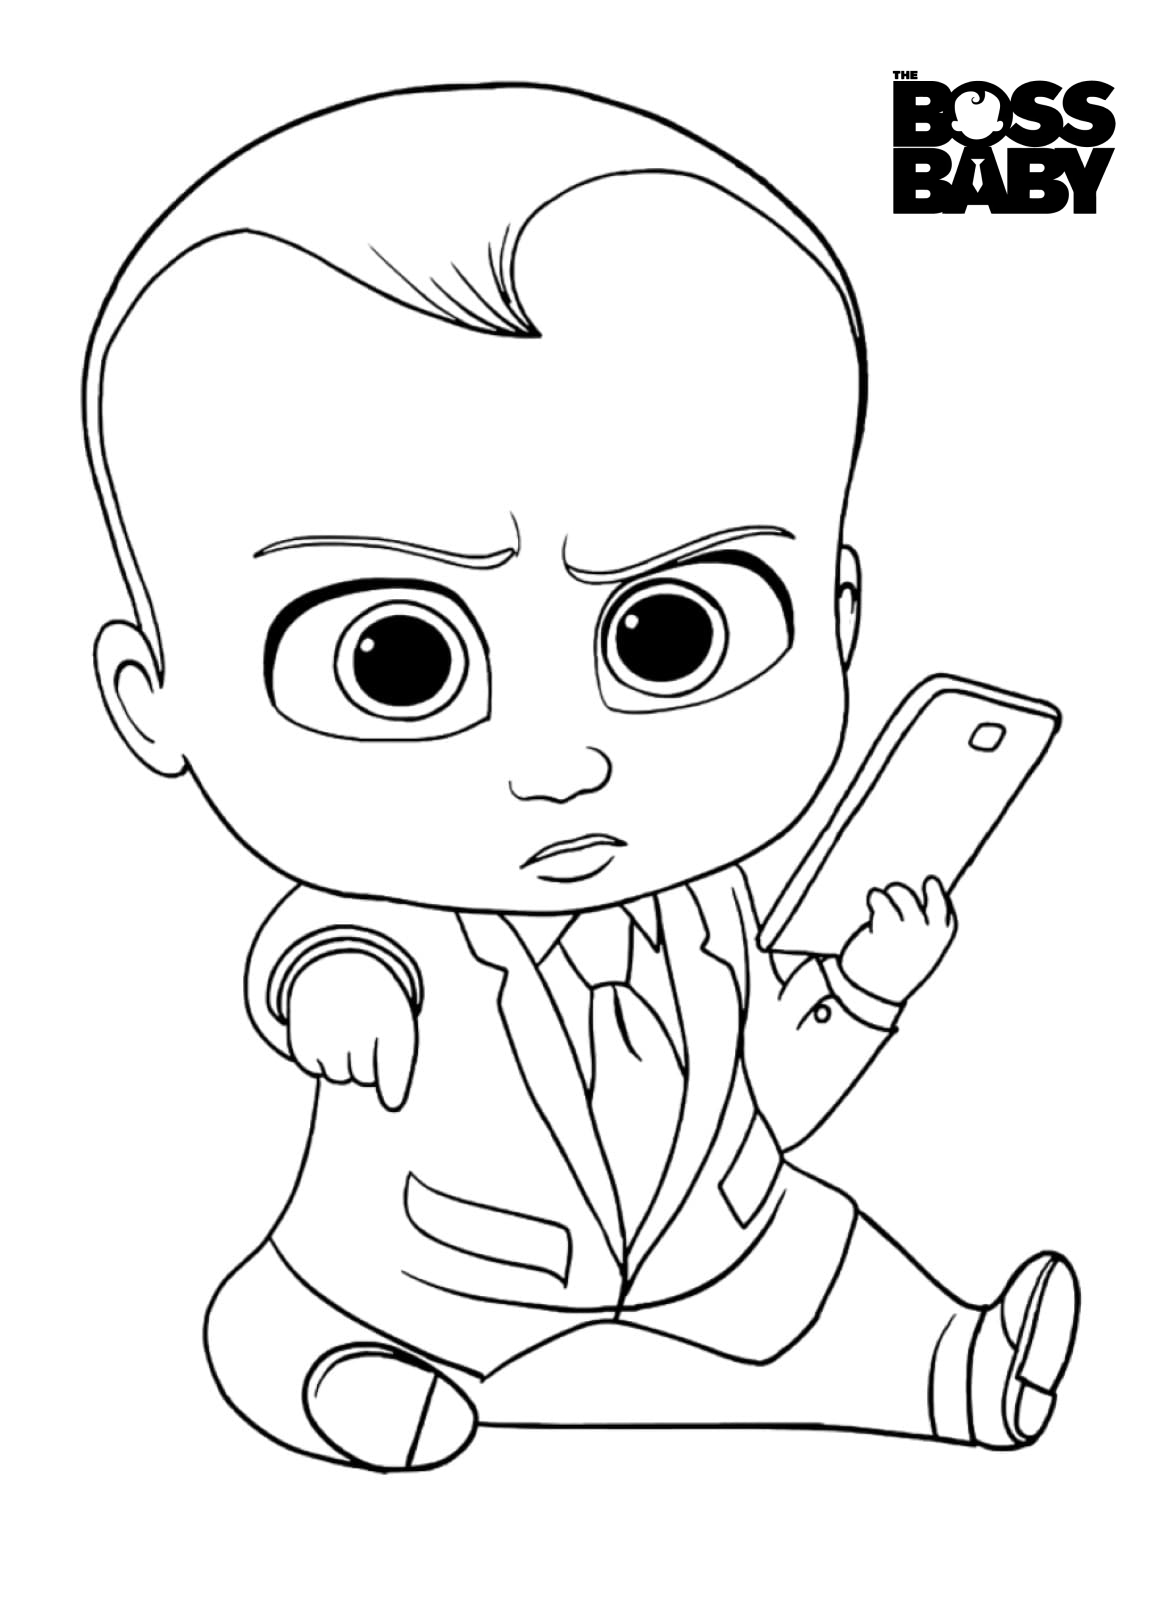 Coloring page Boss Baby 2 Little boss